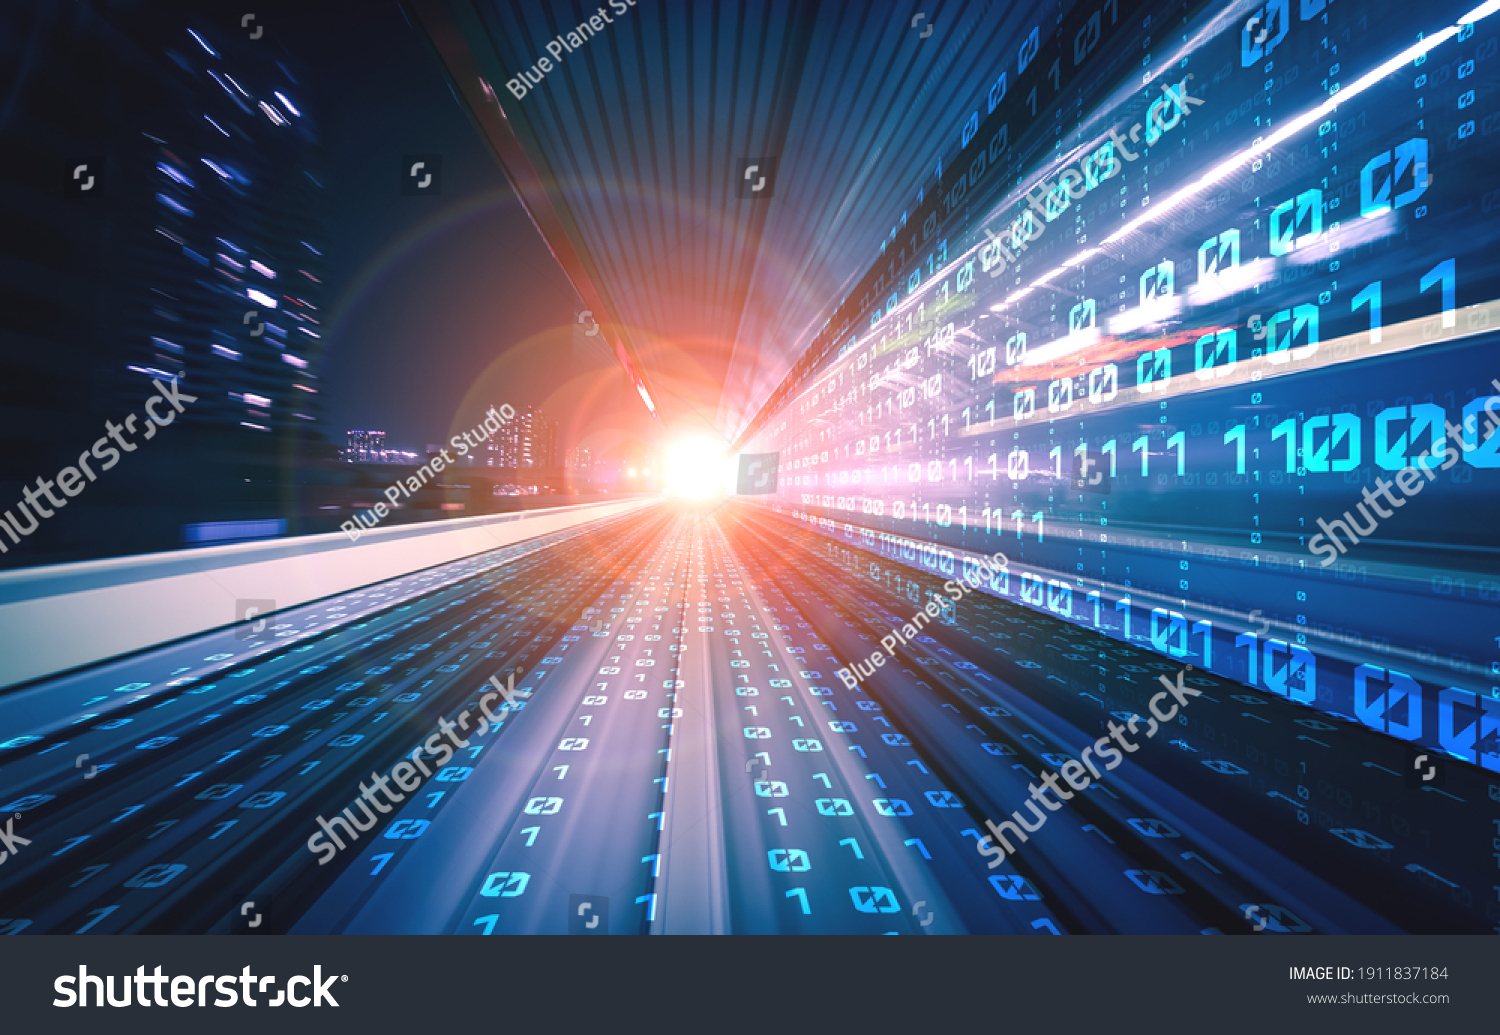 Digital data flow on road with motion blur to create vision of fast speed transfer . Concept of future digital transformation , disruptive innovation and agile business methodology . #1911837184